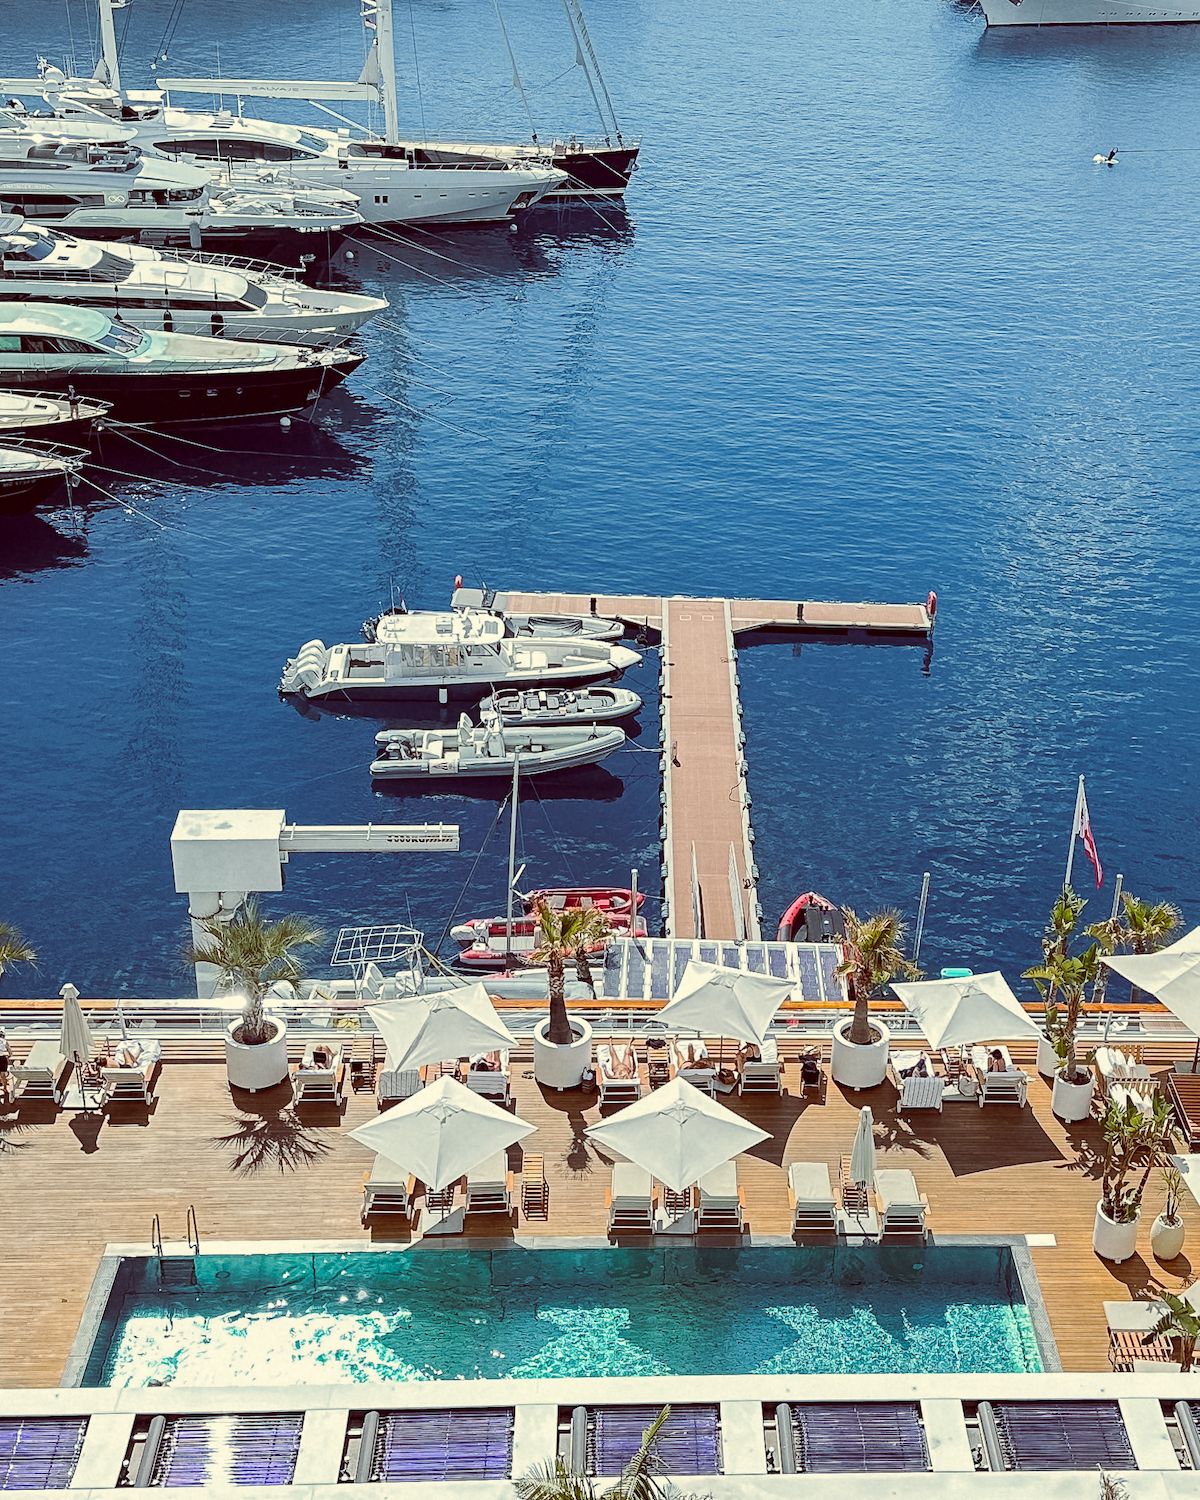 A pool and lounge chairs at a yacht club overlooking Monte Carlo's harbour